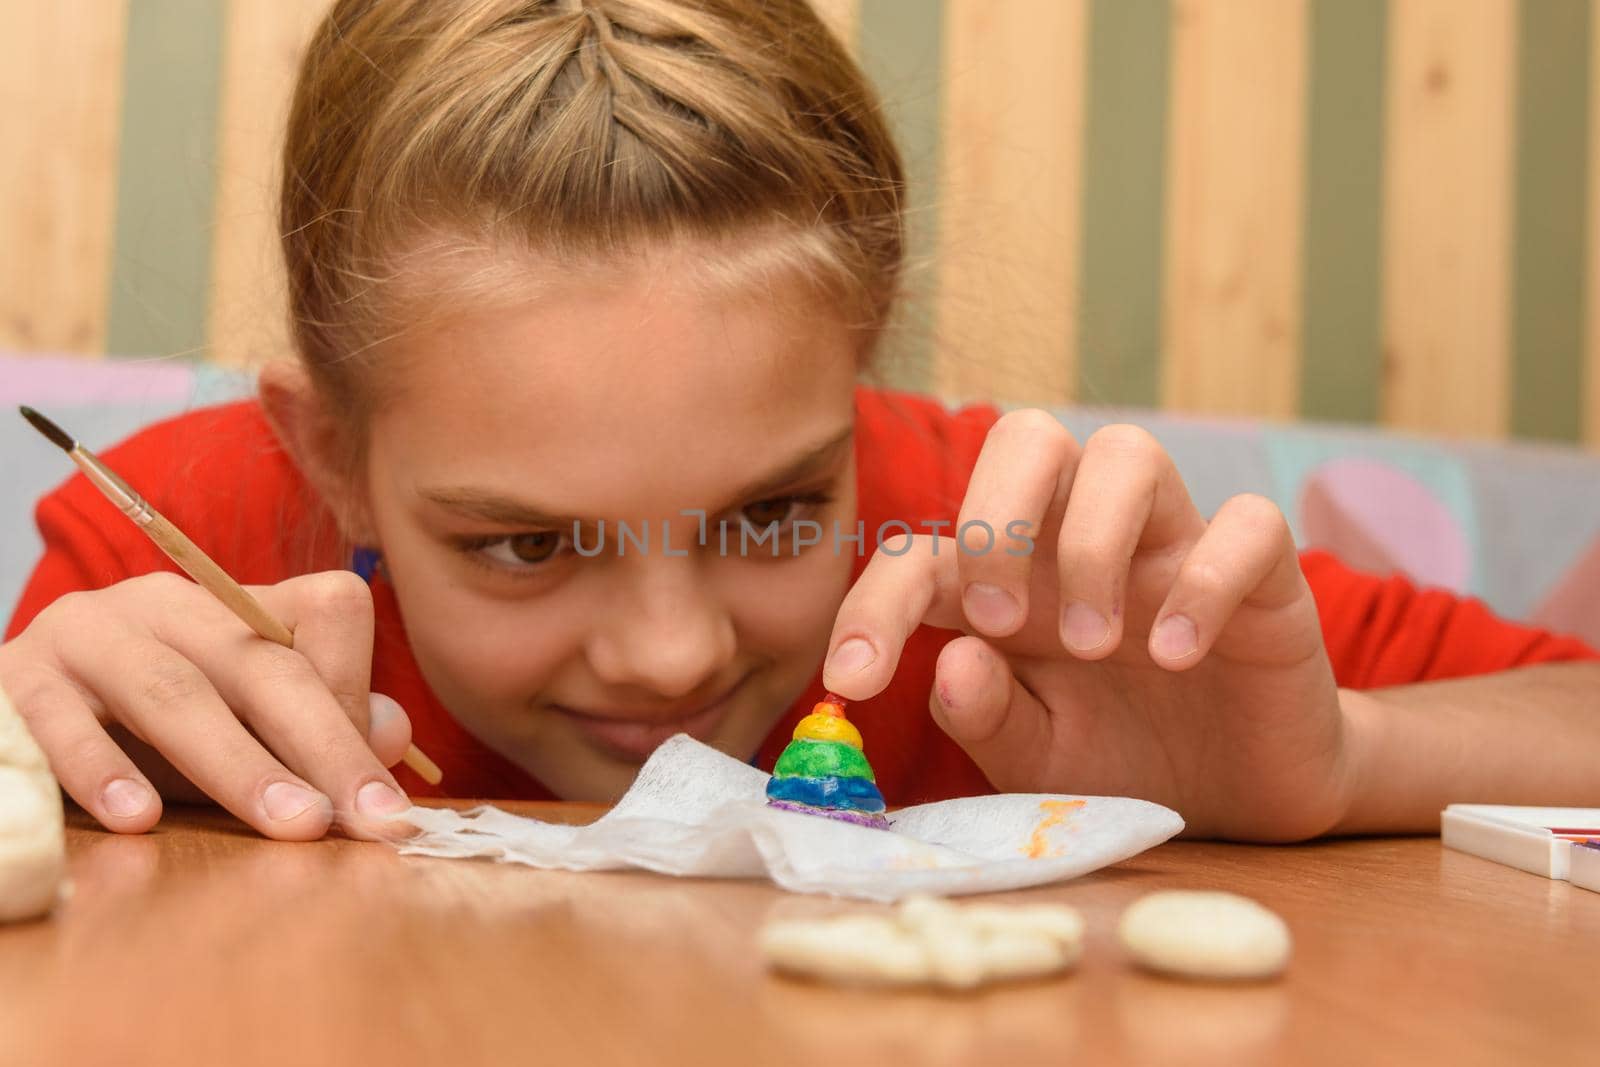 A girl bending over looks at a painted figurine made of salt dough